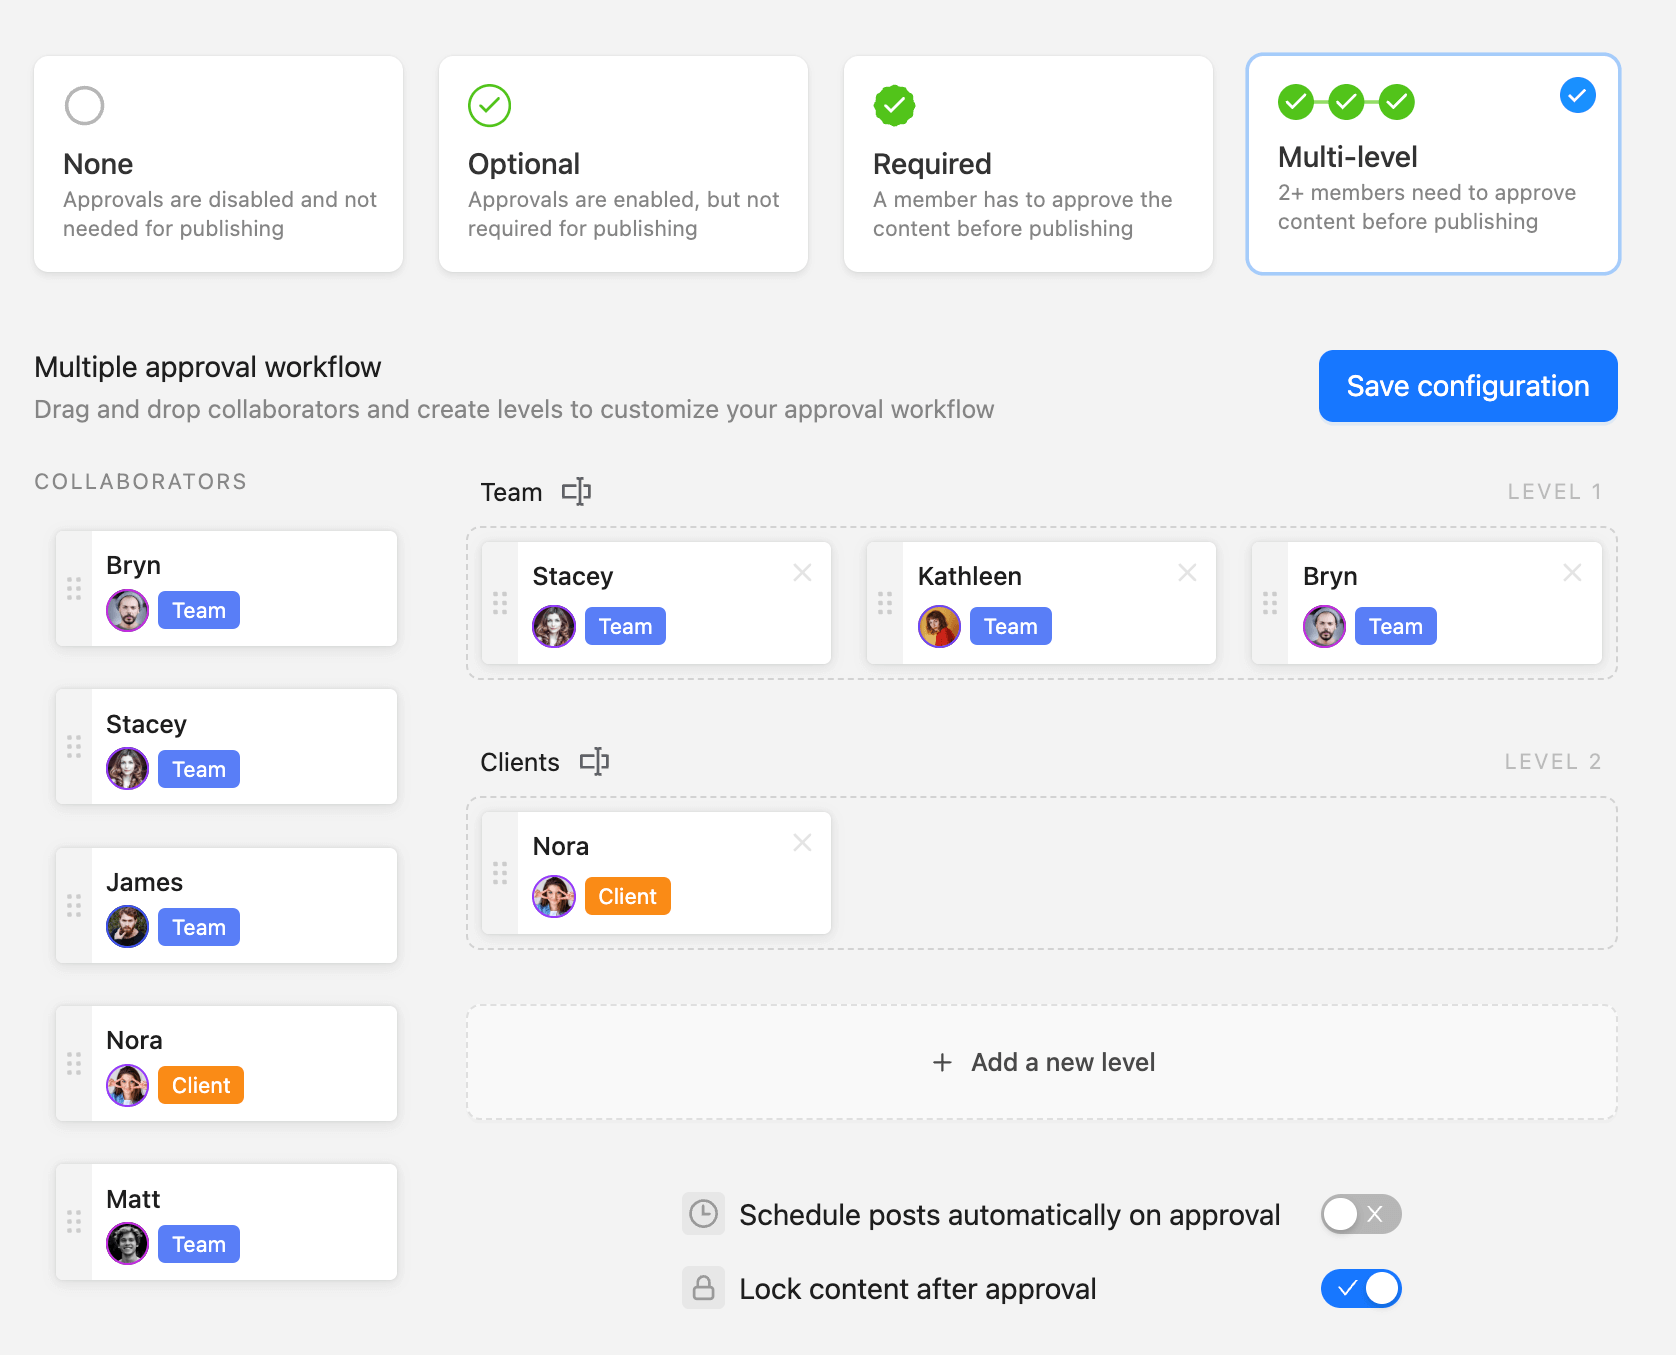 Approval workflow configuration screen in Planable with team and client members assigned to multi-level approval for publishing content. 